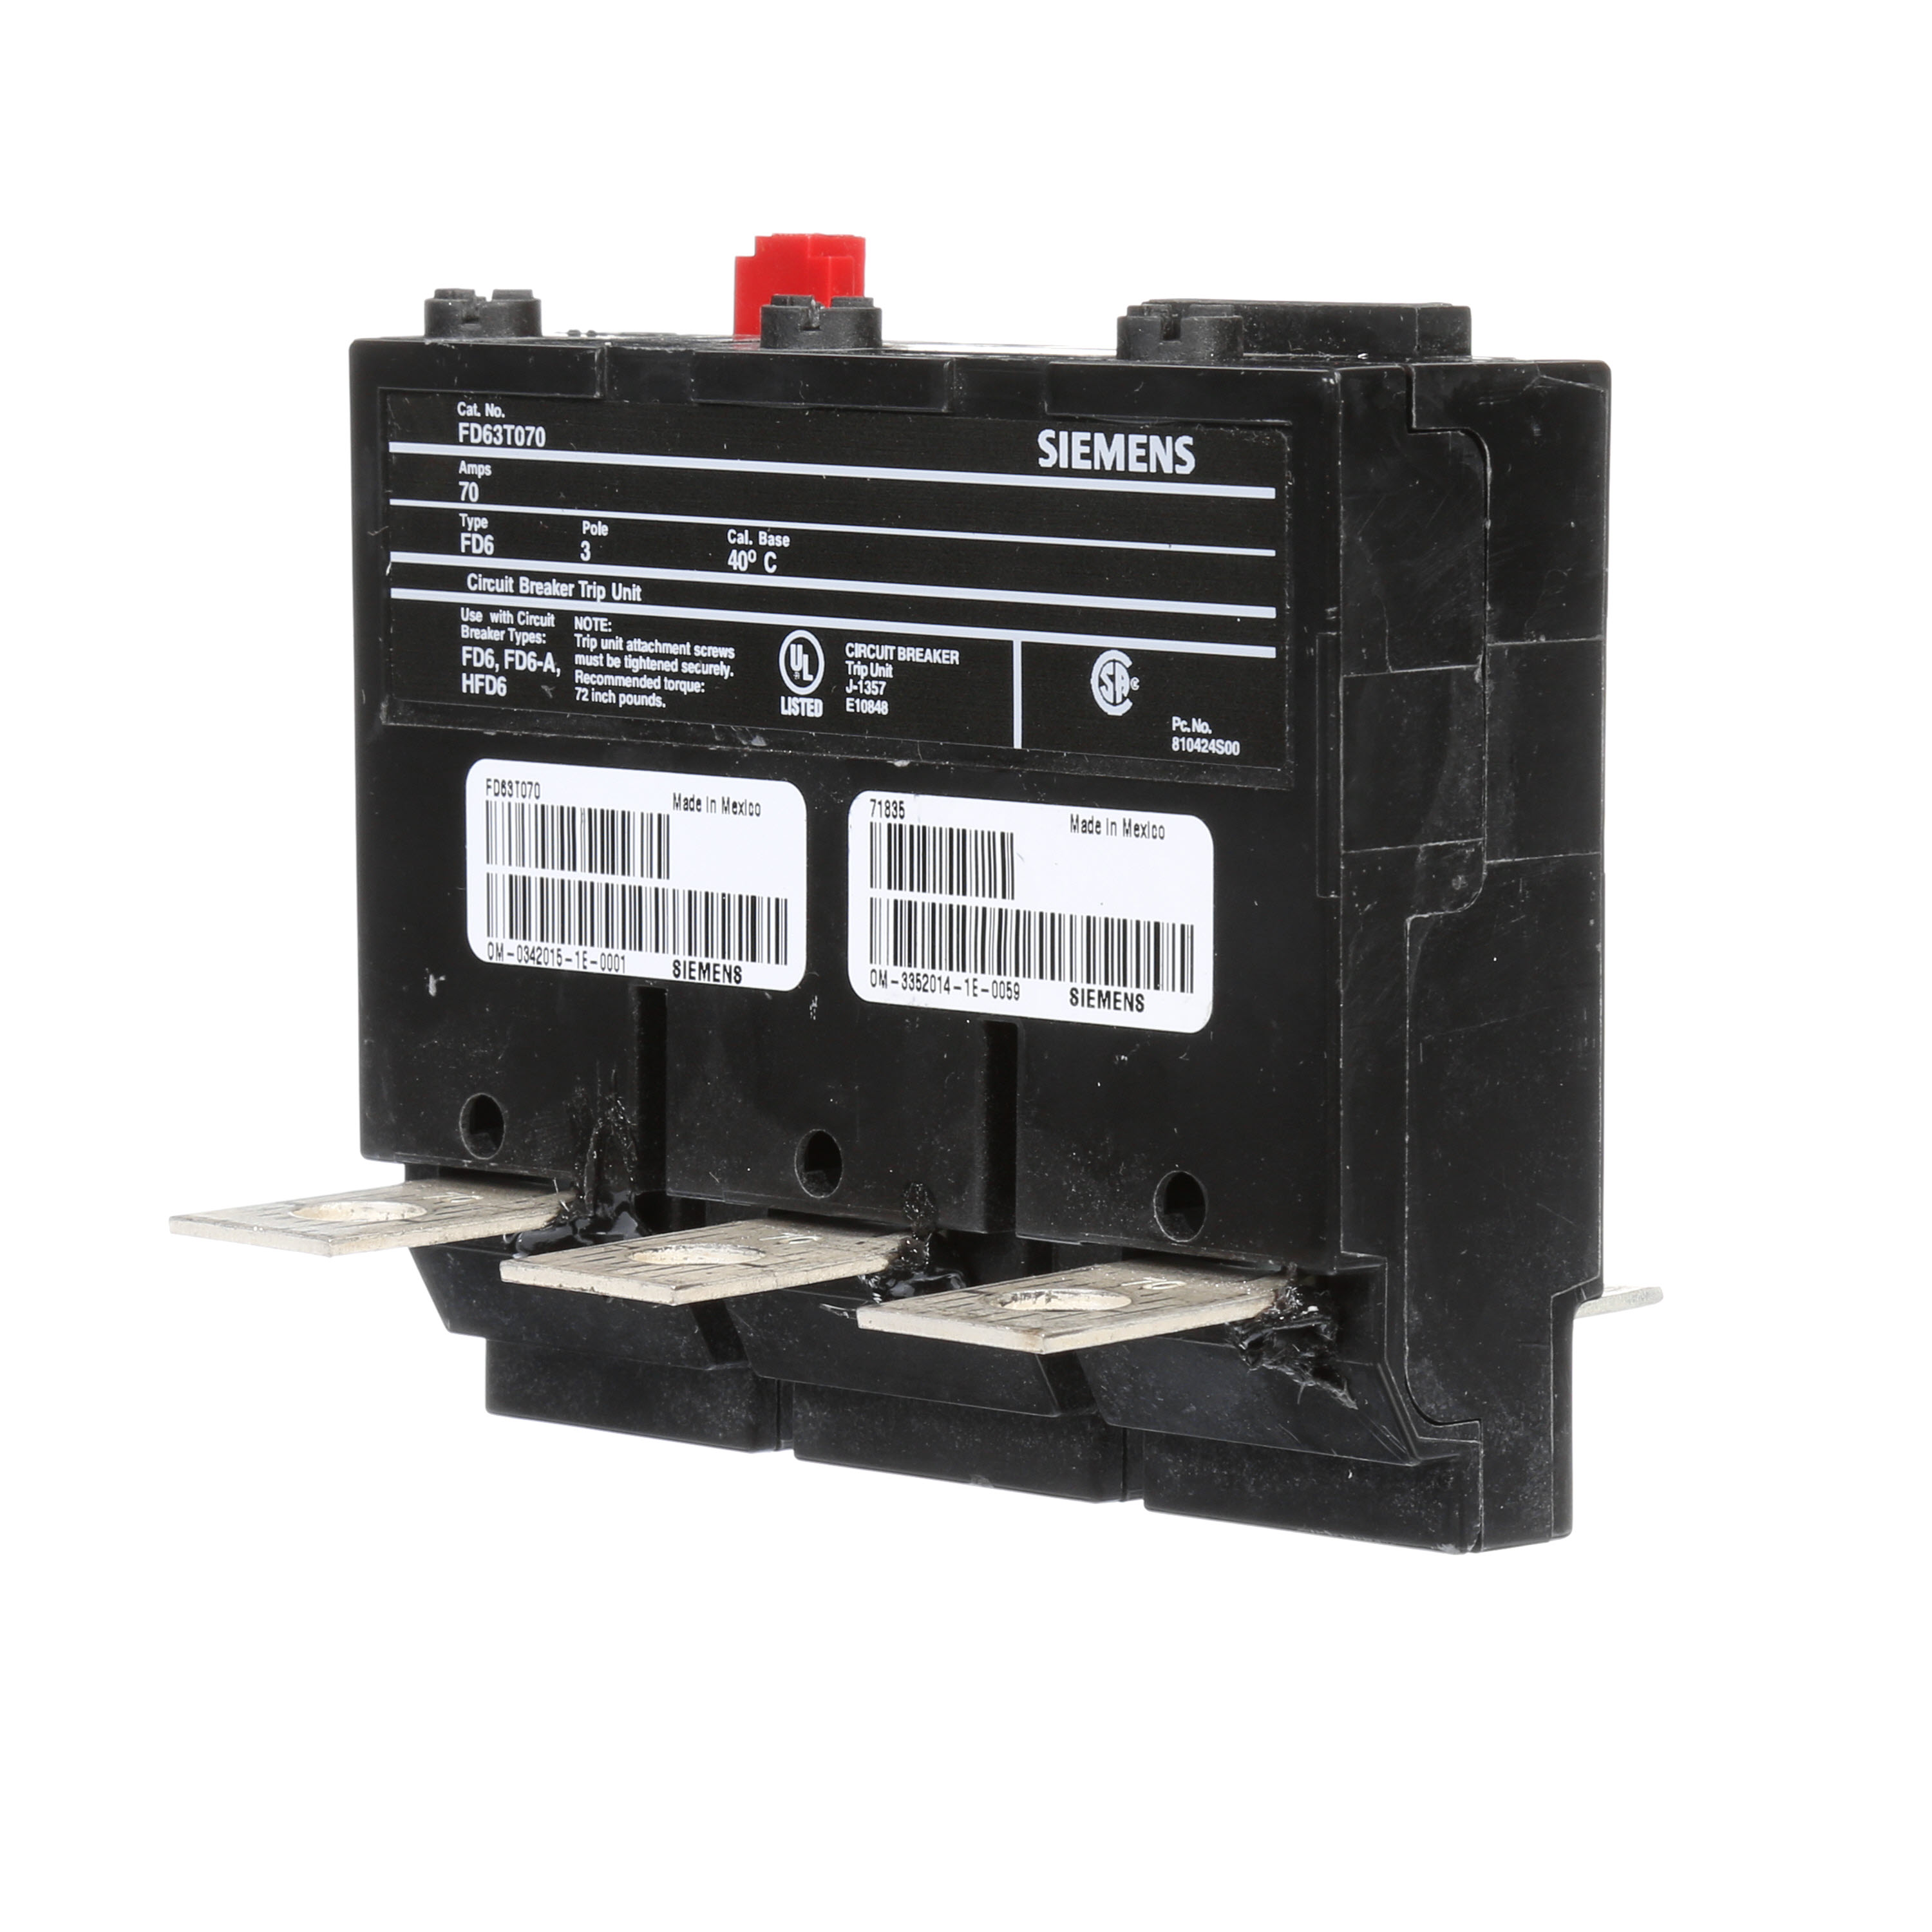 SIEMENS LOW VOLTAGE SENTRON MOLDED CASE CIRCUIT BREAKER. THERMAL - MAGNETIC TRIP UNIT FOR FD FRAME 70A 3-POLE 600V BREAKERS.